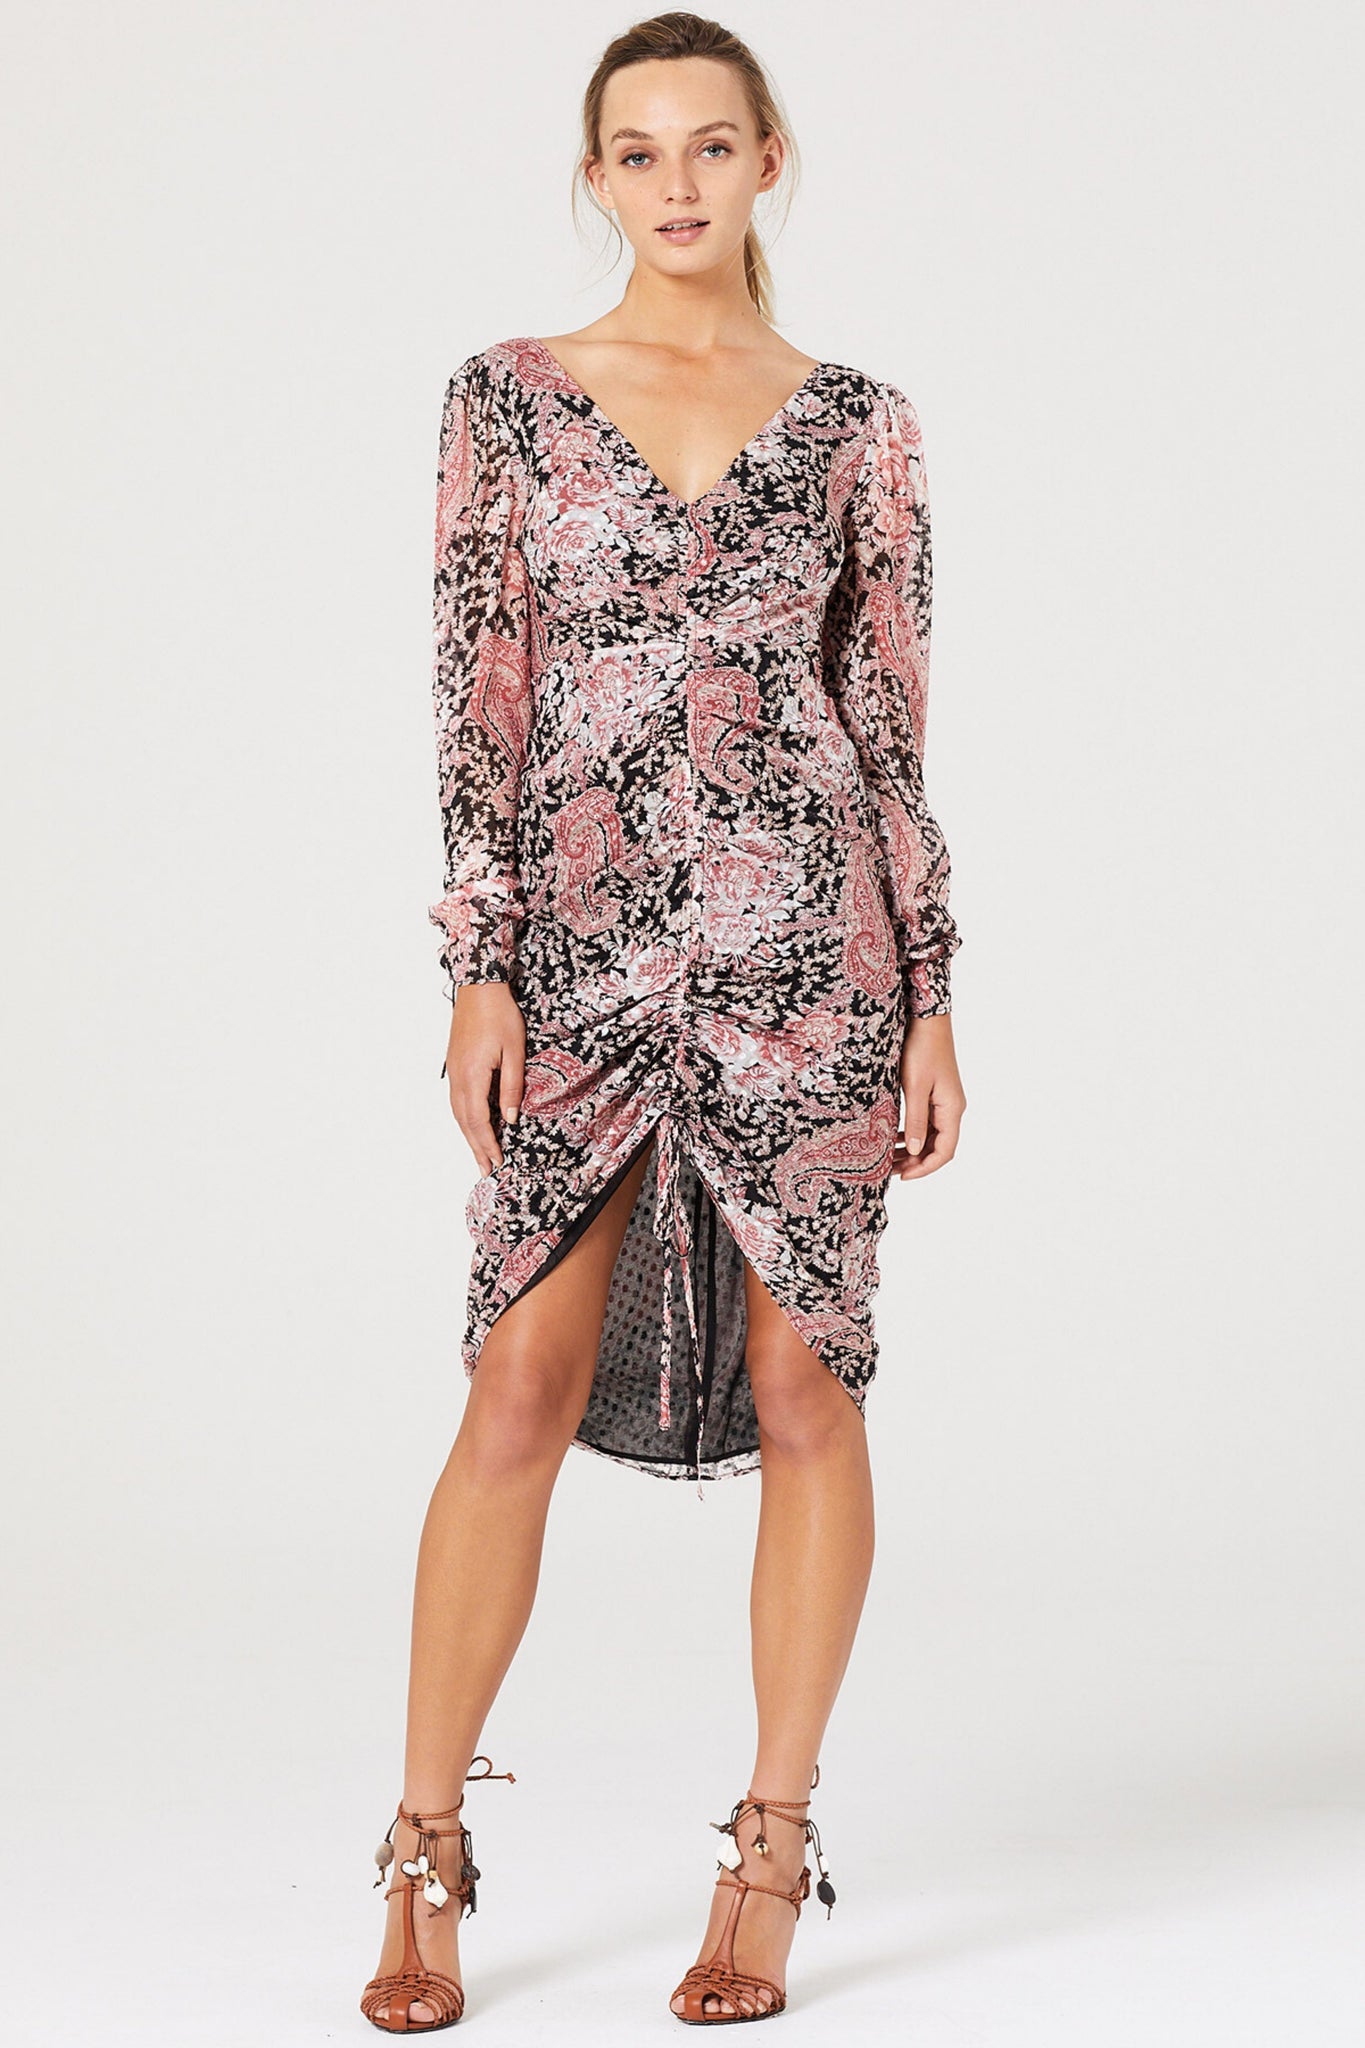 Buy Stevie May What You Feel Midi Dress online now at Smoke and Mirrors Boutique. Shop Stevie May What You Feel Midi Dress with AfterPay and ZipPay. Stevie May Stockists Toowoomba. 